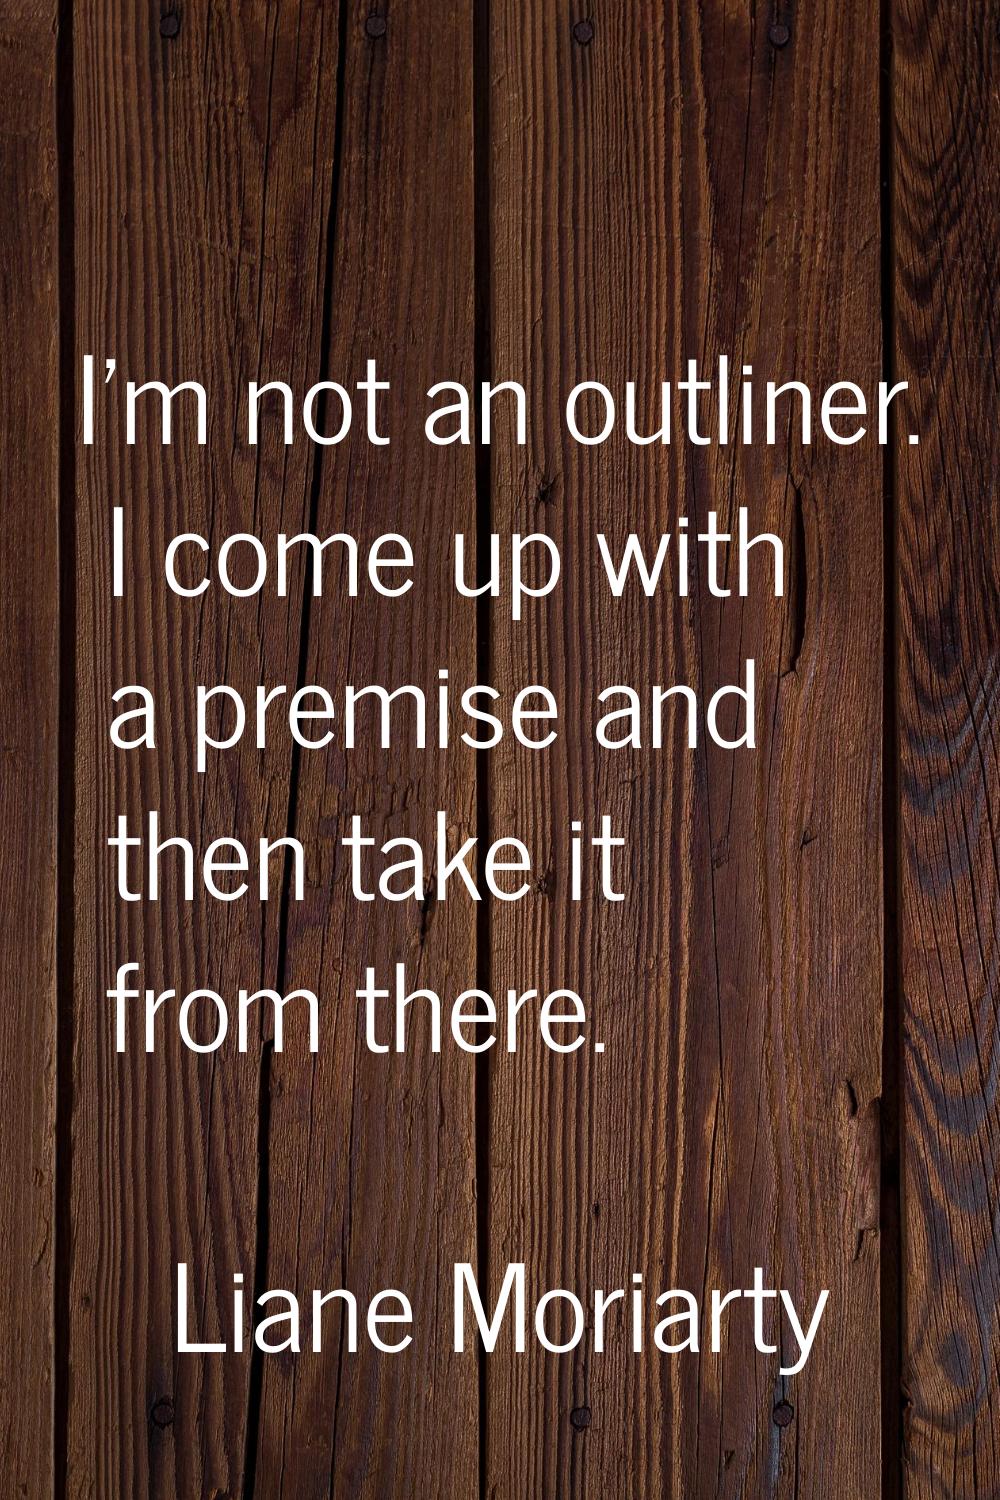 I'm not an outliner. I come up with a premise and then take it from there.